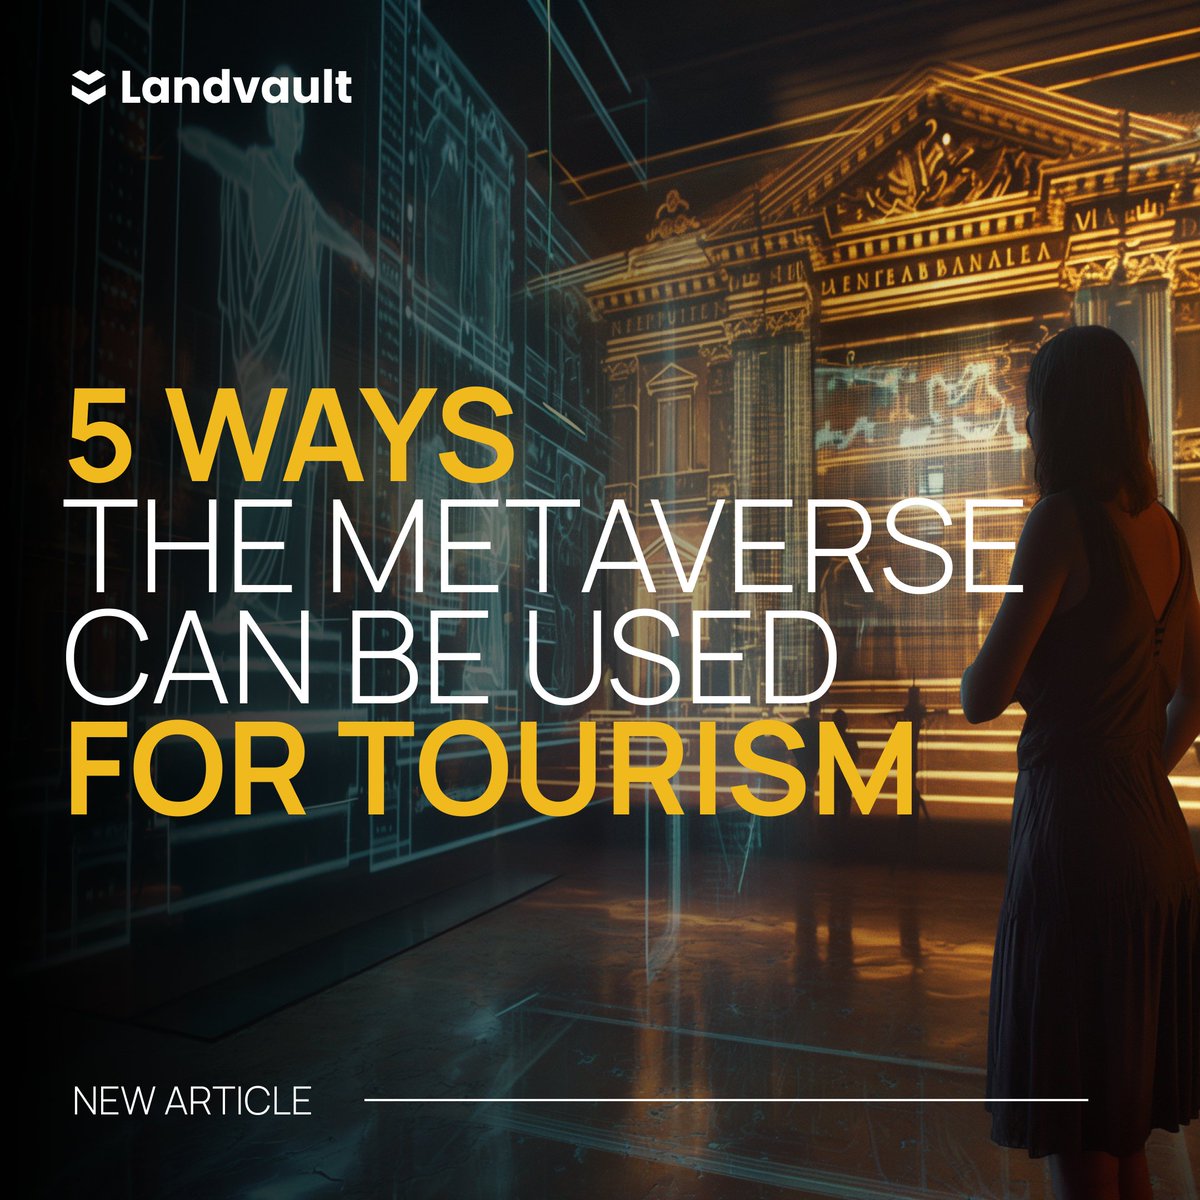 Virtual tourism is on track to reach $24.1 billion by 2027, as per @StatistaCharts. 🌴 Whether it's virtual tours or destination marketing, the traditional tourism sector is undergoing a massive change thanks to metaverse technology. 📖 landvault.io/blog/5-ways-th…